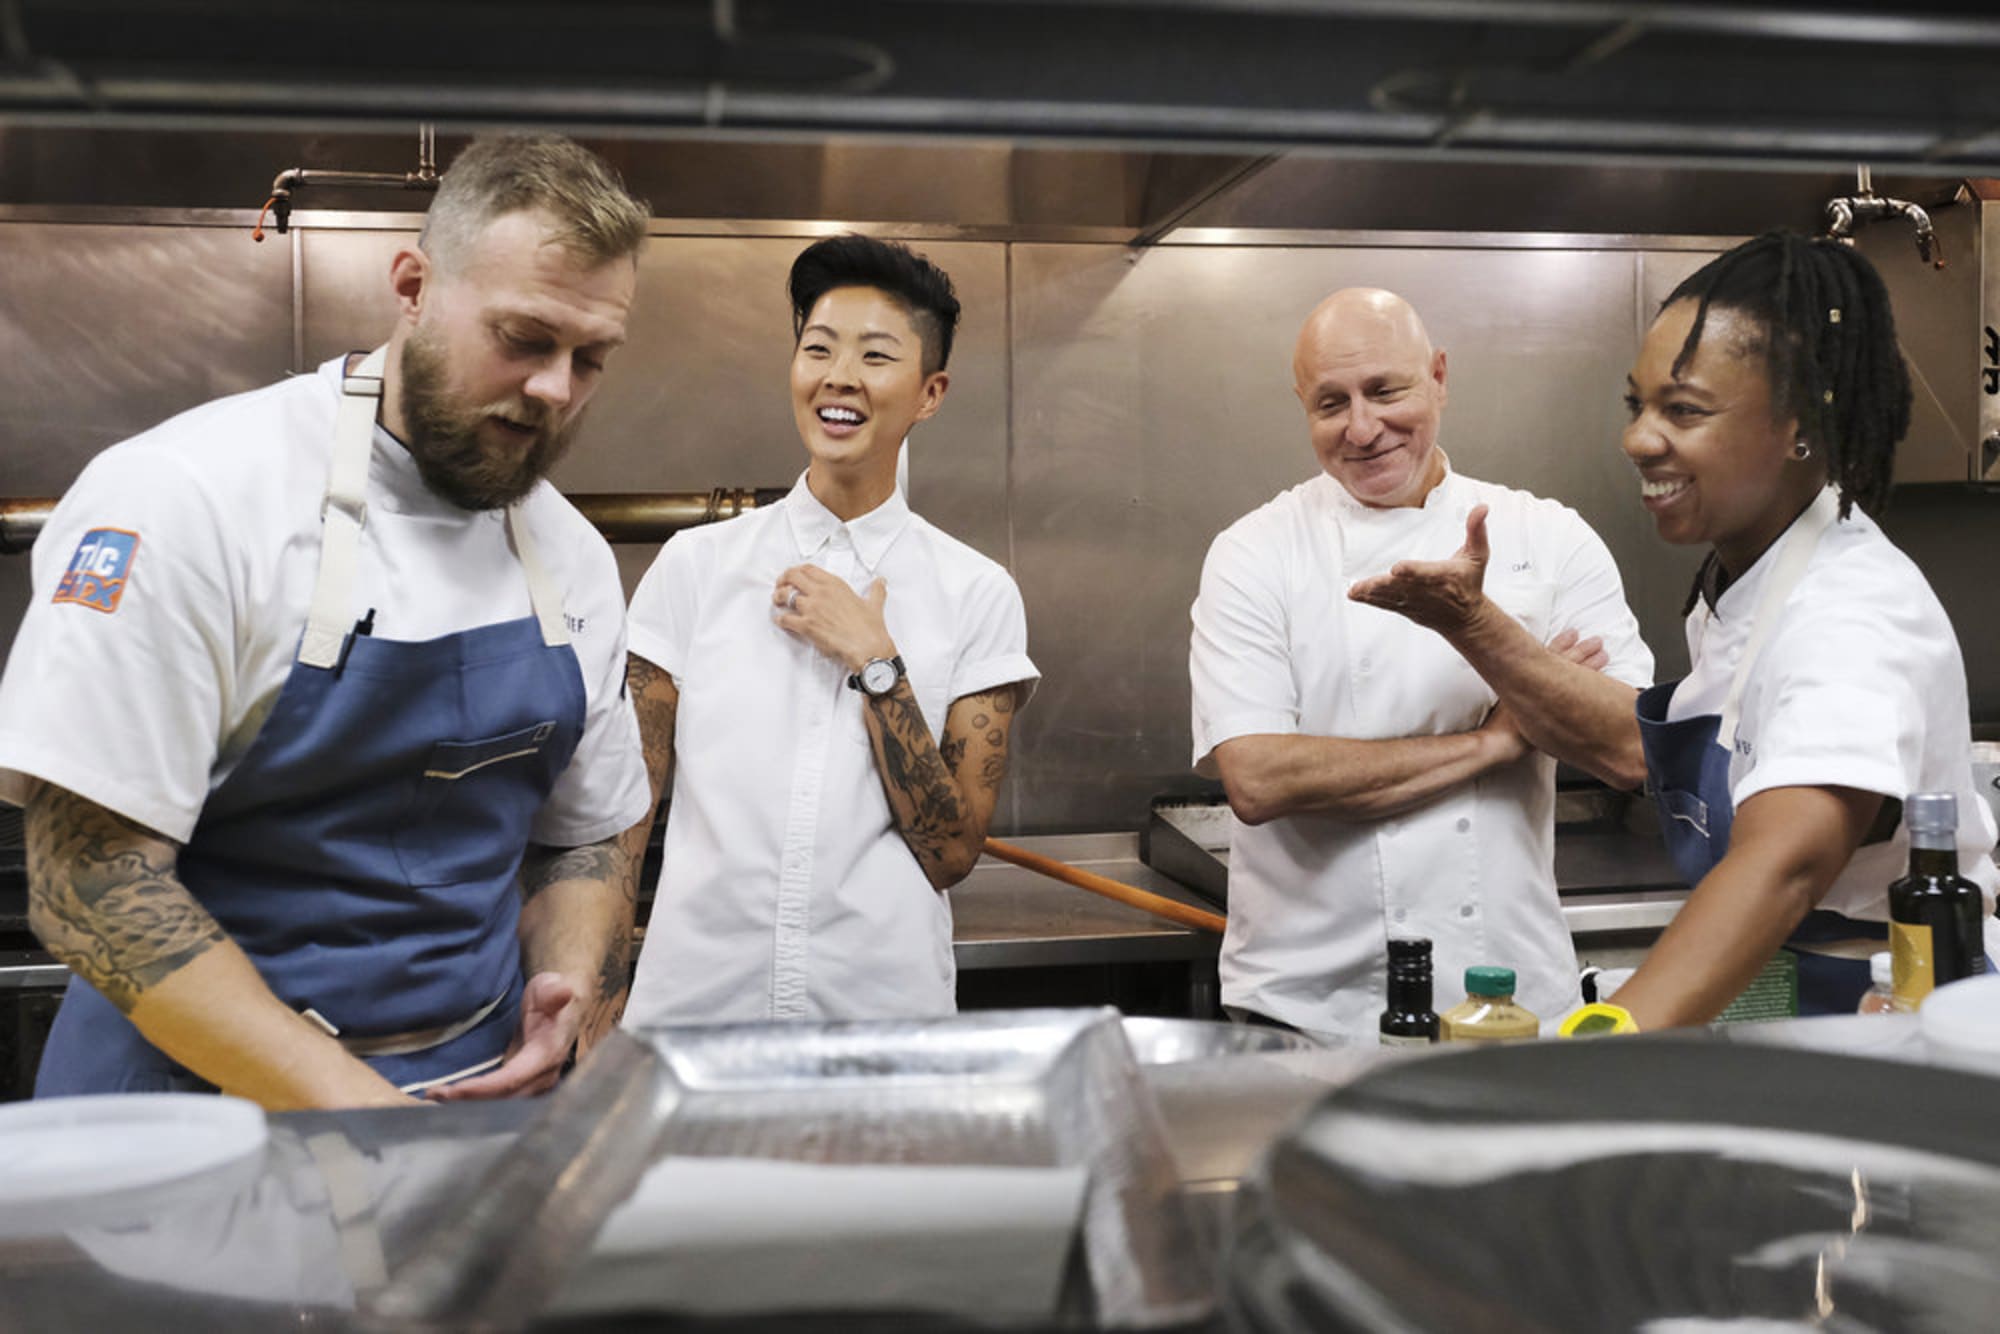 Top Chef A preview of Last Chance Kitchen Season 19